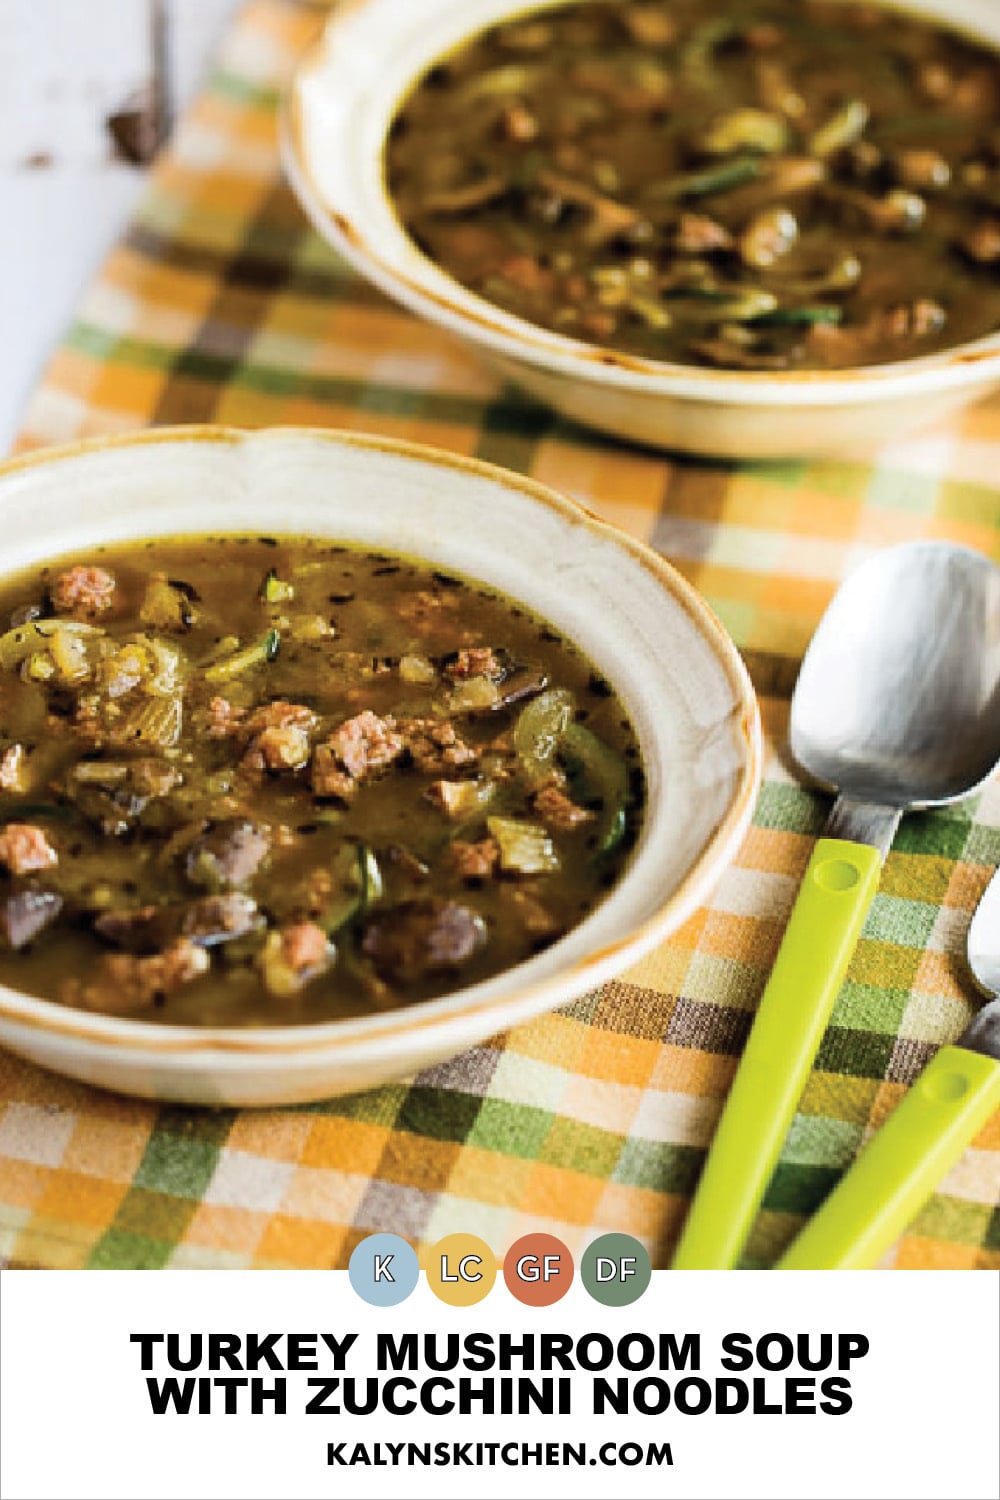 Pinterest image of Turkey Mushroom Soup with Zucchini Noodles